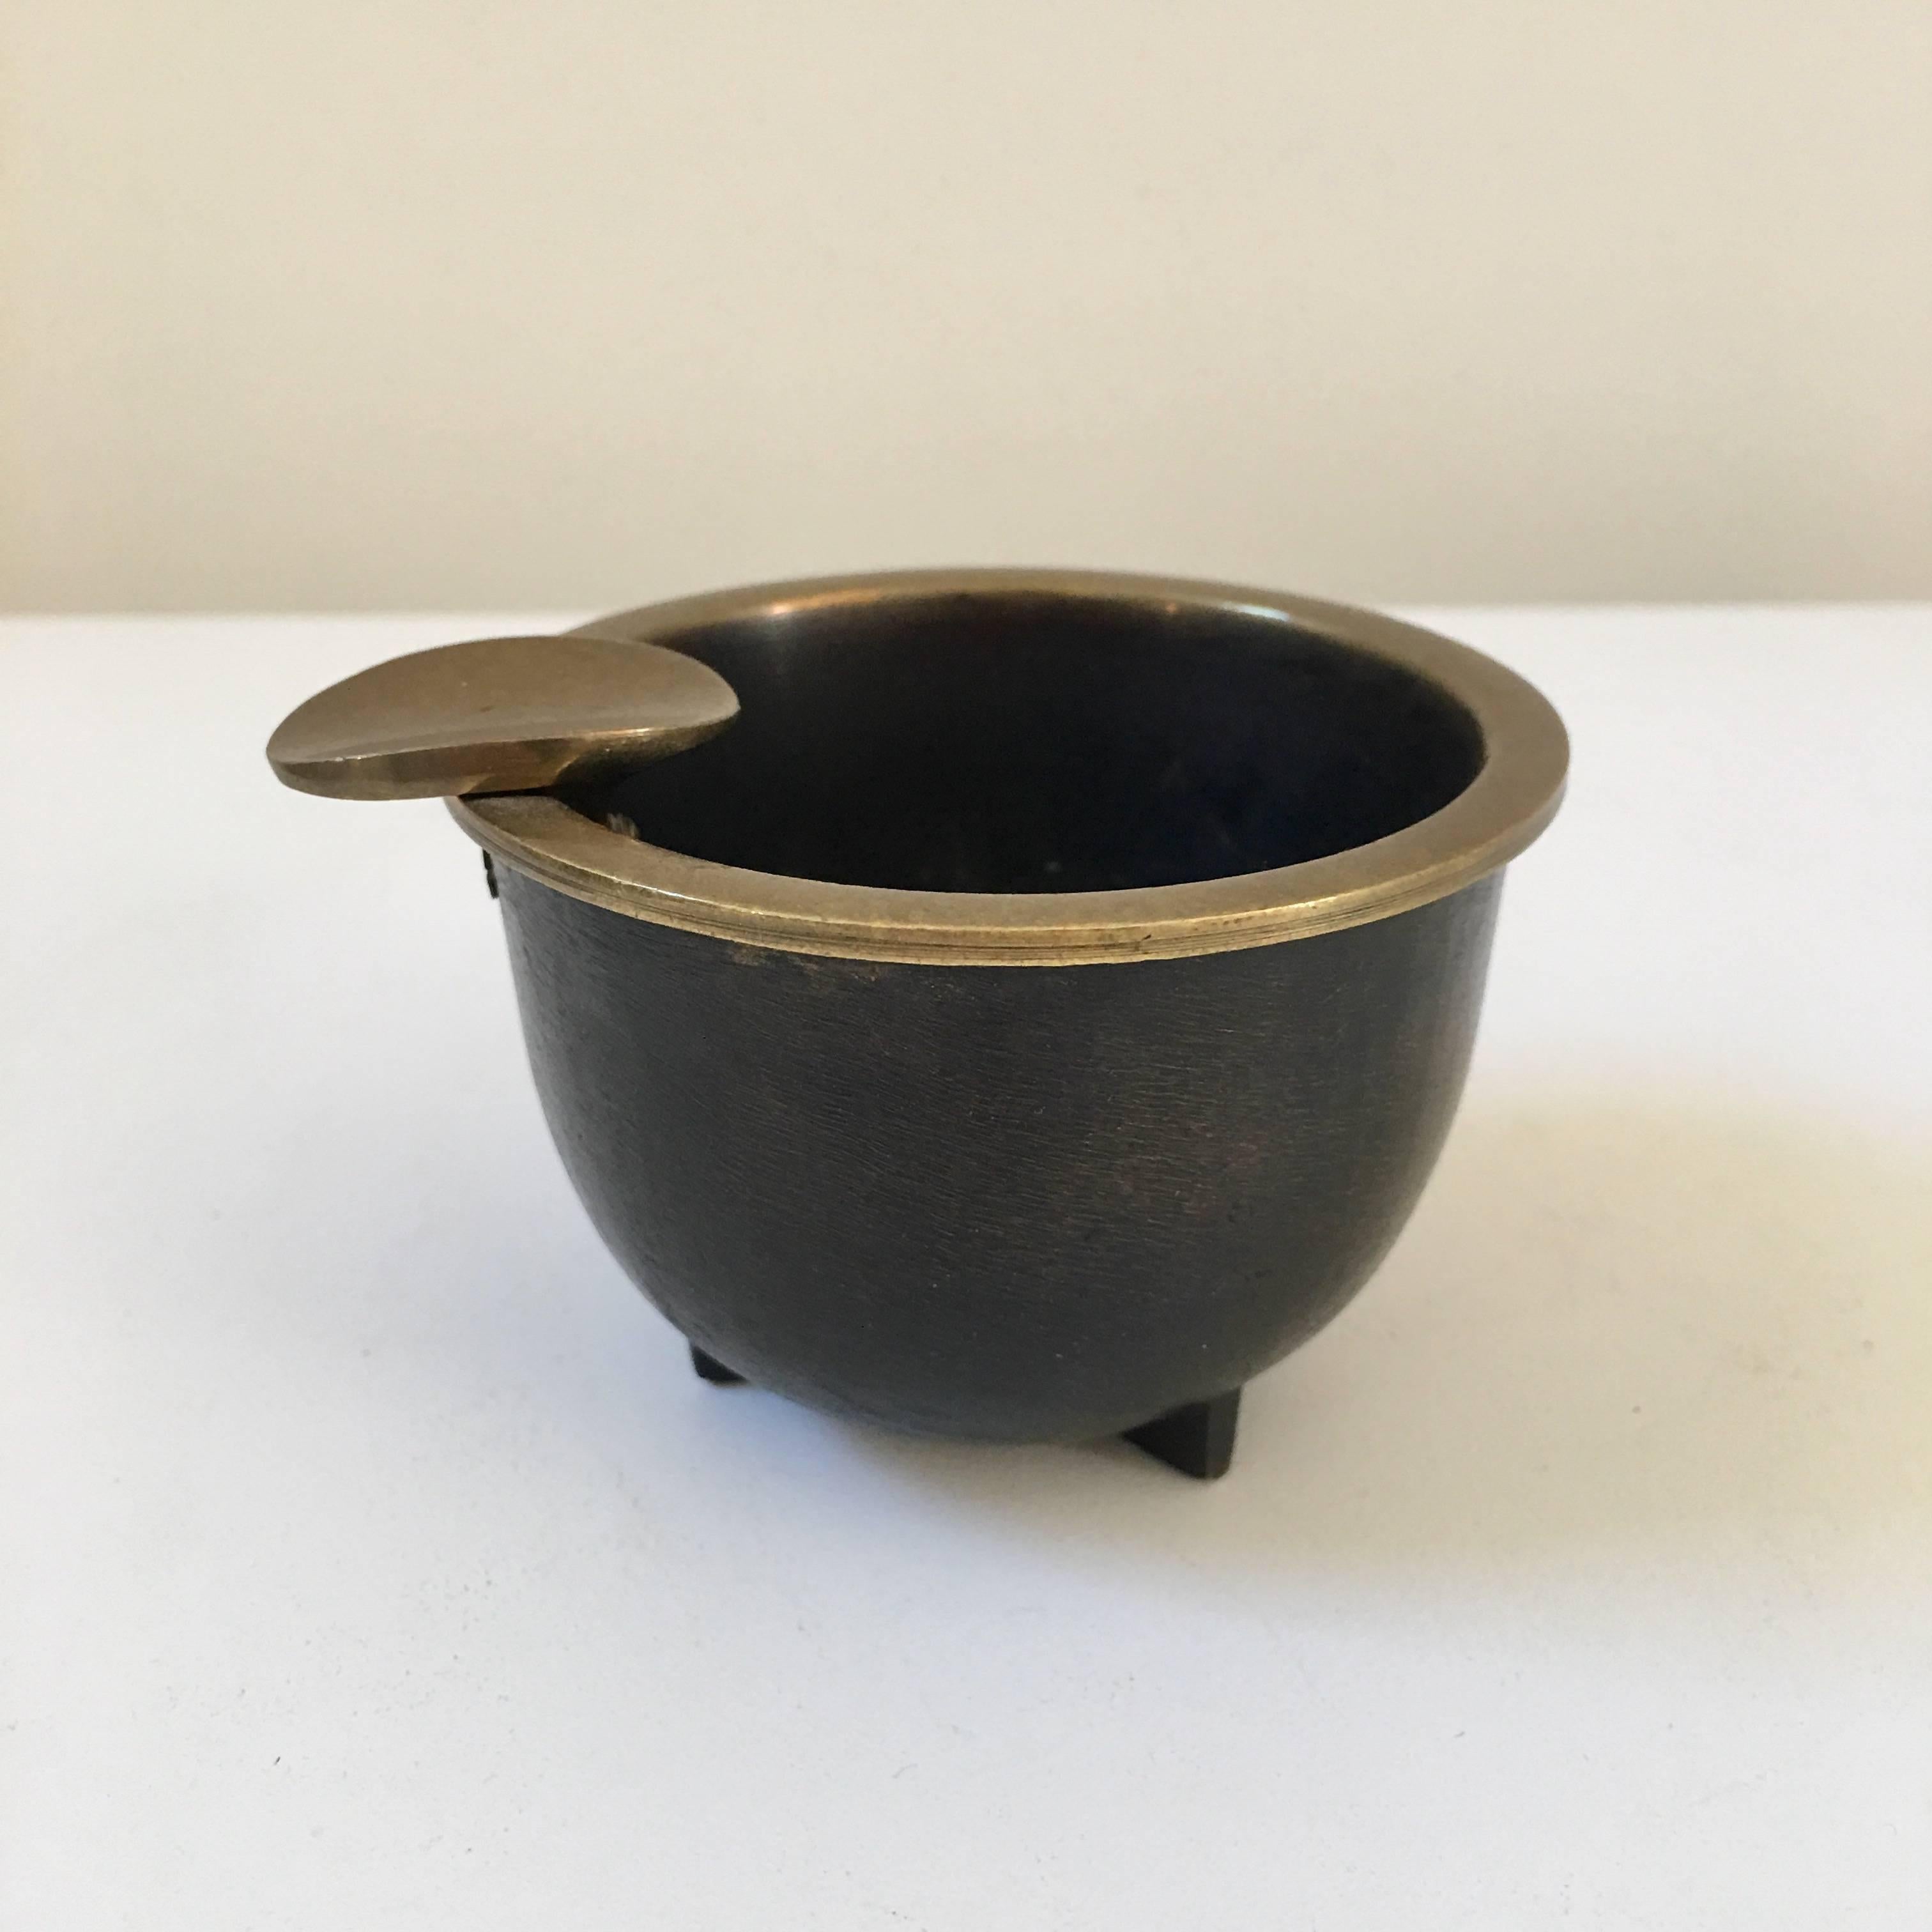 A small but unique bronze ashtray sculpted to perfection. Stamped in the bottom.